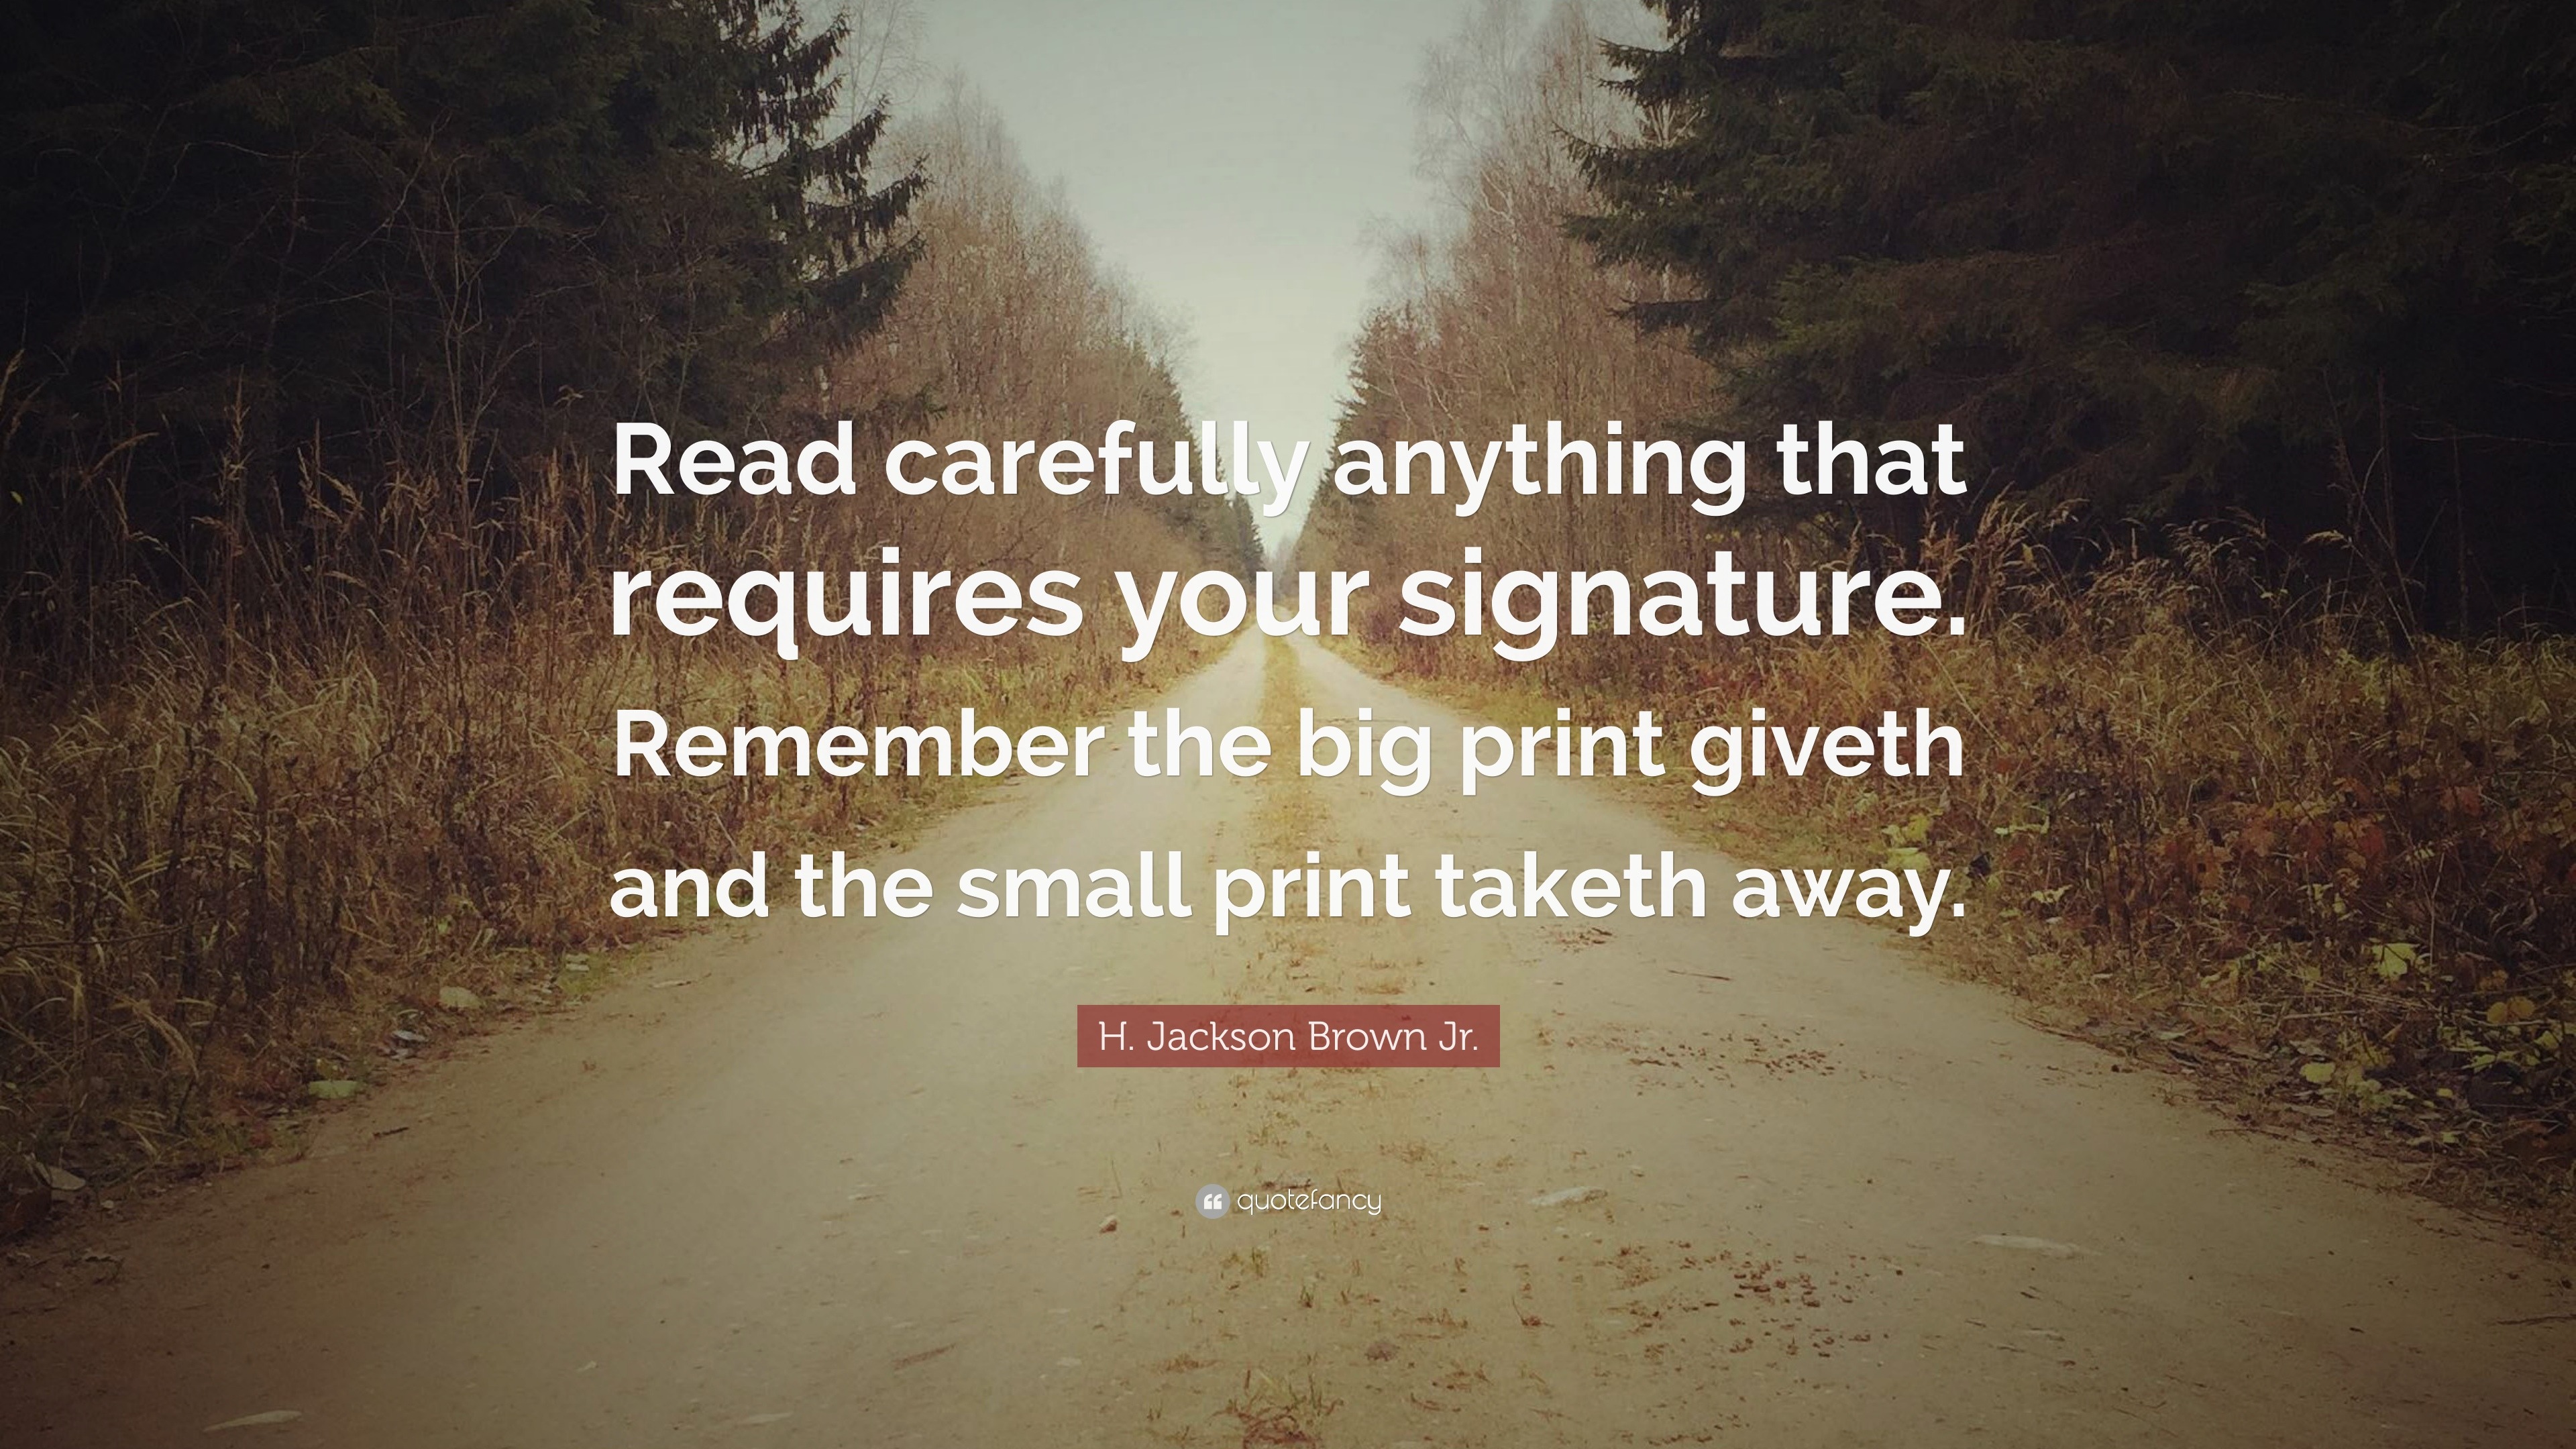 H. Jackson Brown Jr. Quote: “Read carefully anything that requires your  signature. Remember the big print